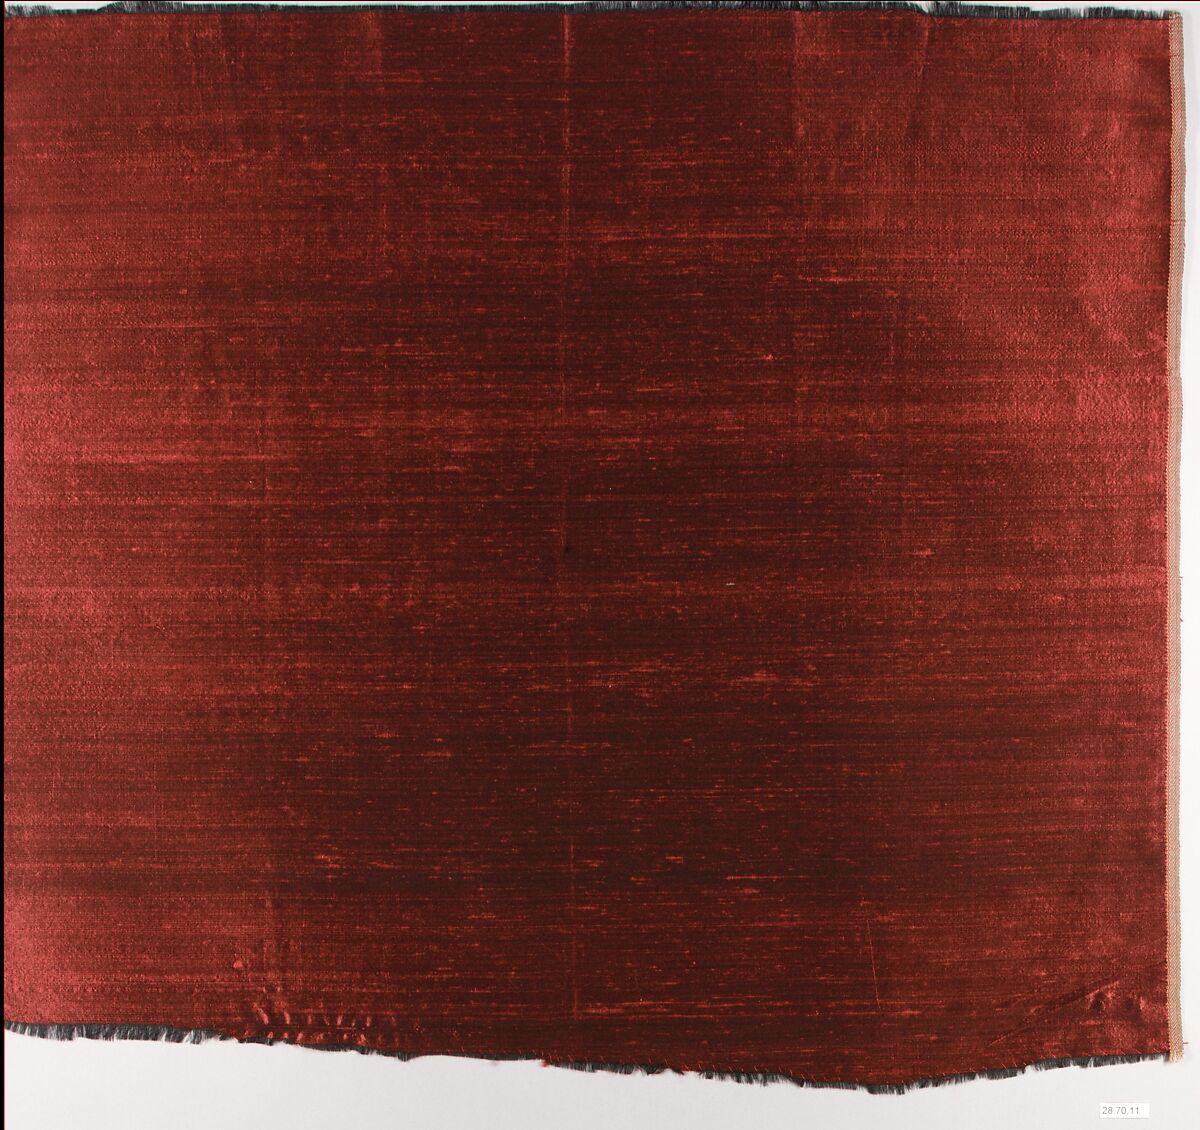 Changeable-color textile, Associated Artists (1883–1907), Silk, woven, American 